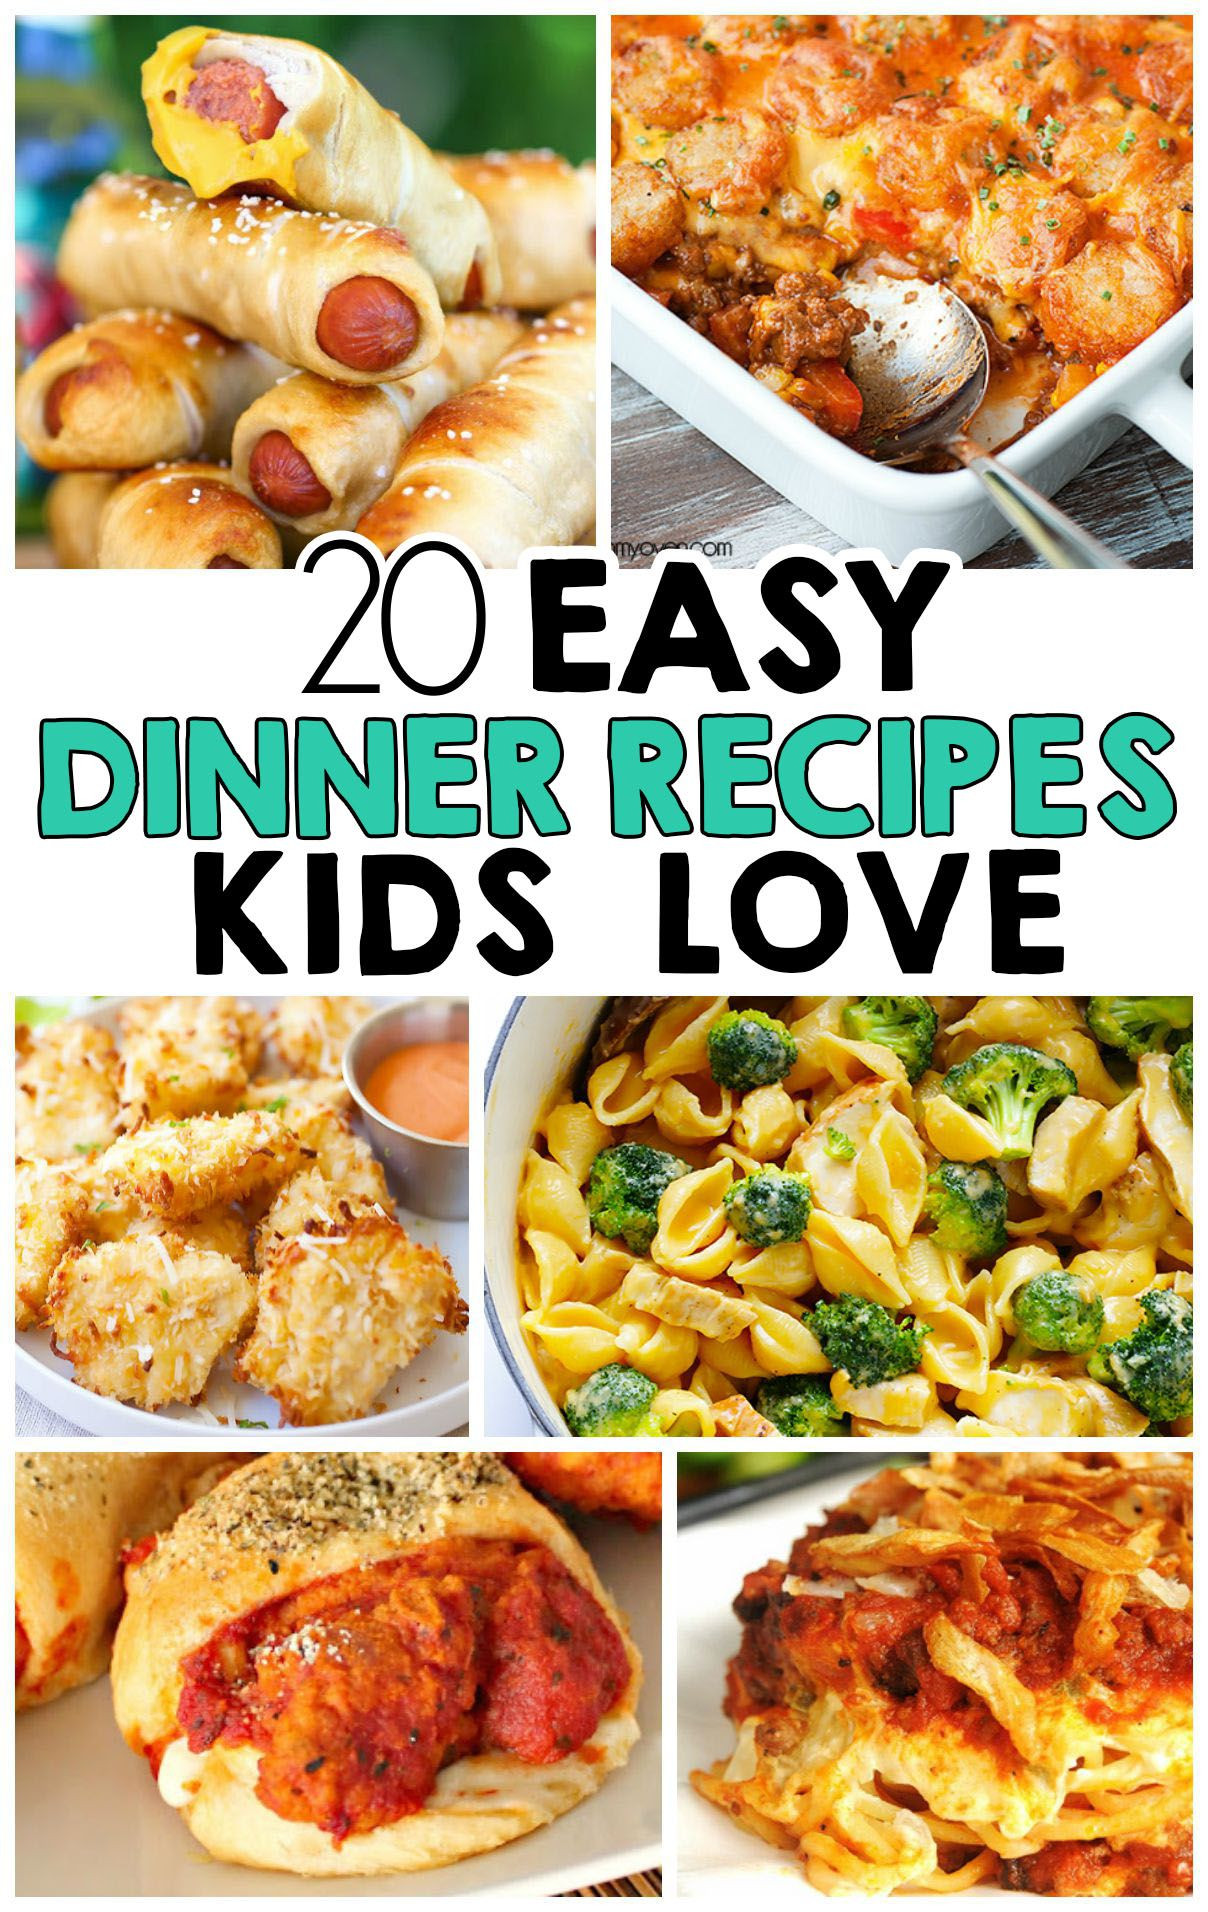 Fun Healthy Dinners
 20 Easy Dinner Recipes That Kids Love